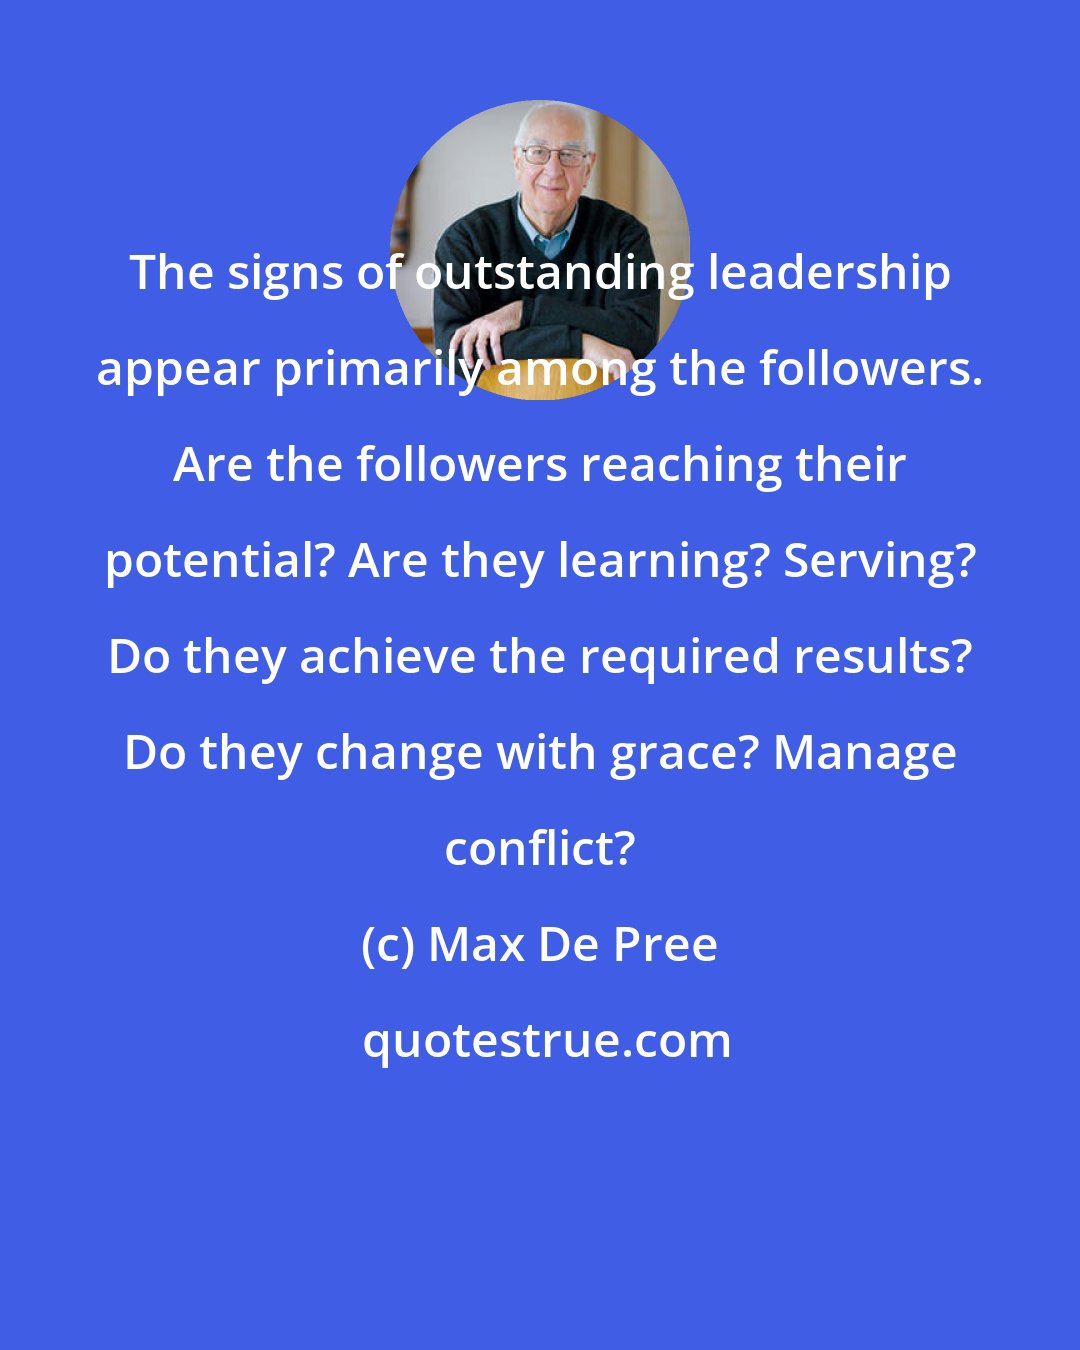 Max De Pree: The signs of outstanding leadership appear primarily among the followers. Are the followers reaching their potential? Are they learning? Serving? Do they achieve the required results? Do they change with grace? Manage conflict?